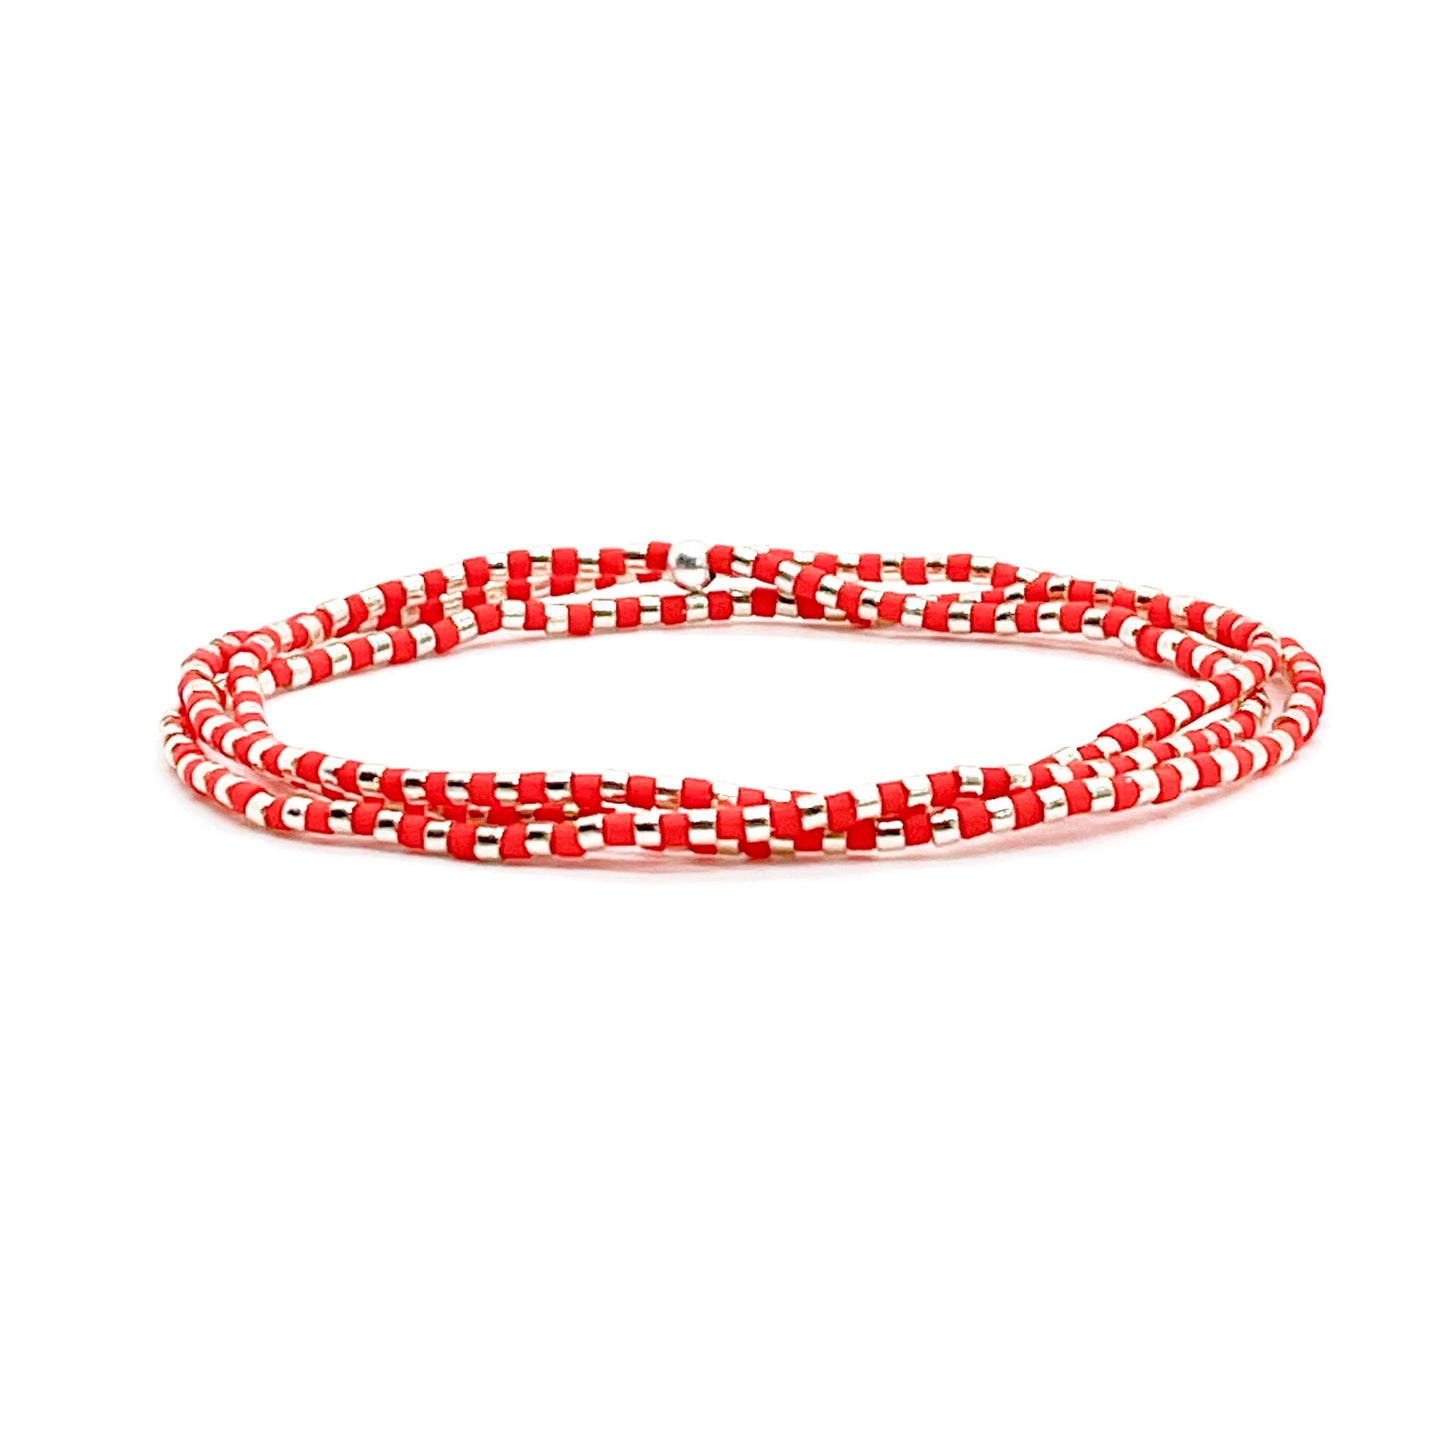 Beaded wrap bracelet with tiny red and silver-tone glass seed beads on stretch cord.